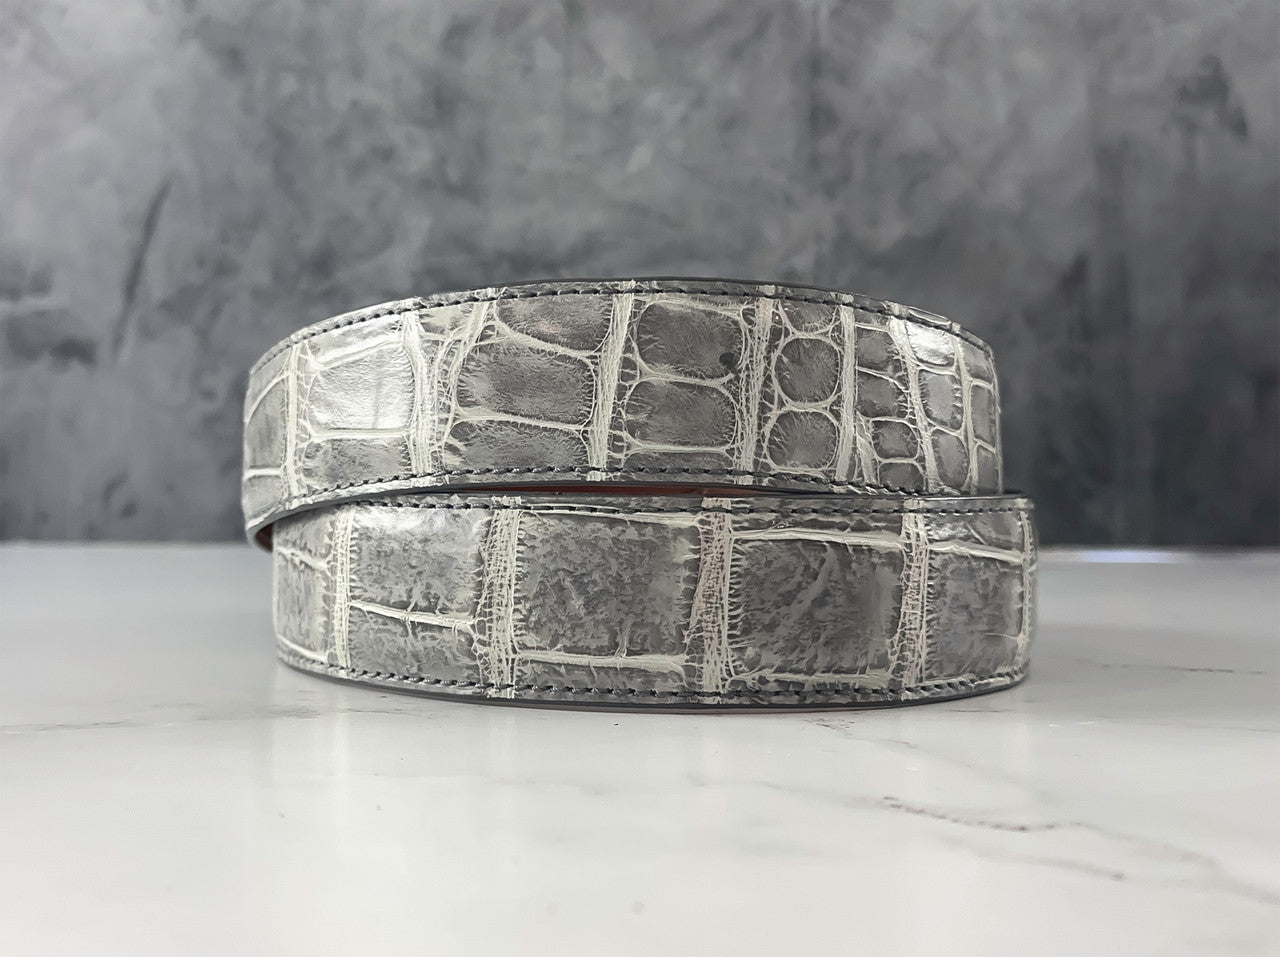 Hand-painted American Alligator Belt: Grey and White (The DJ)